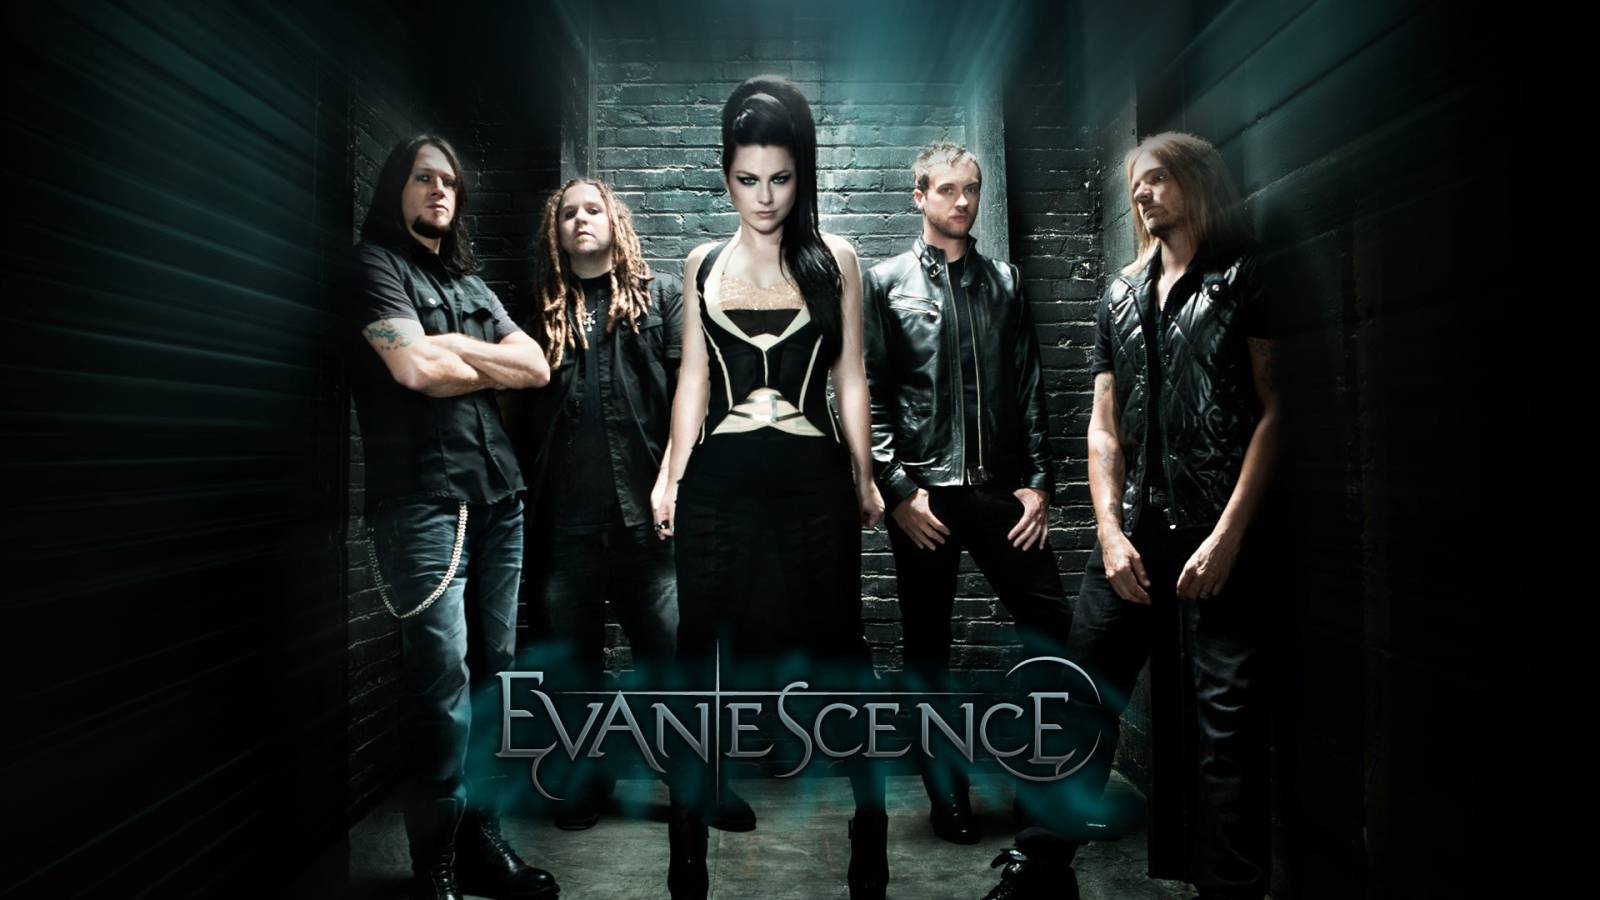 The group Evanescence